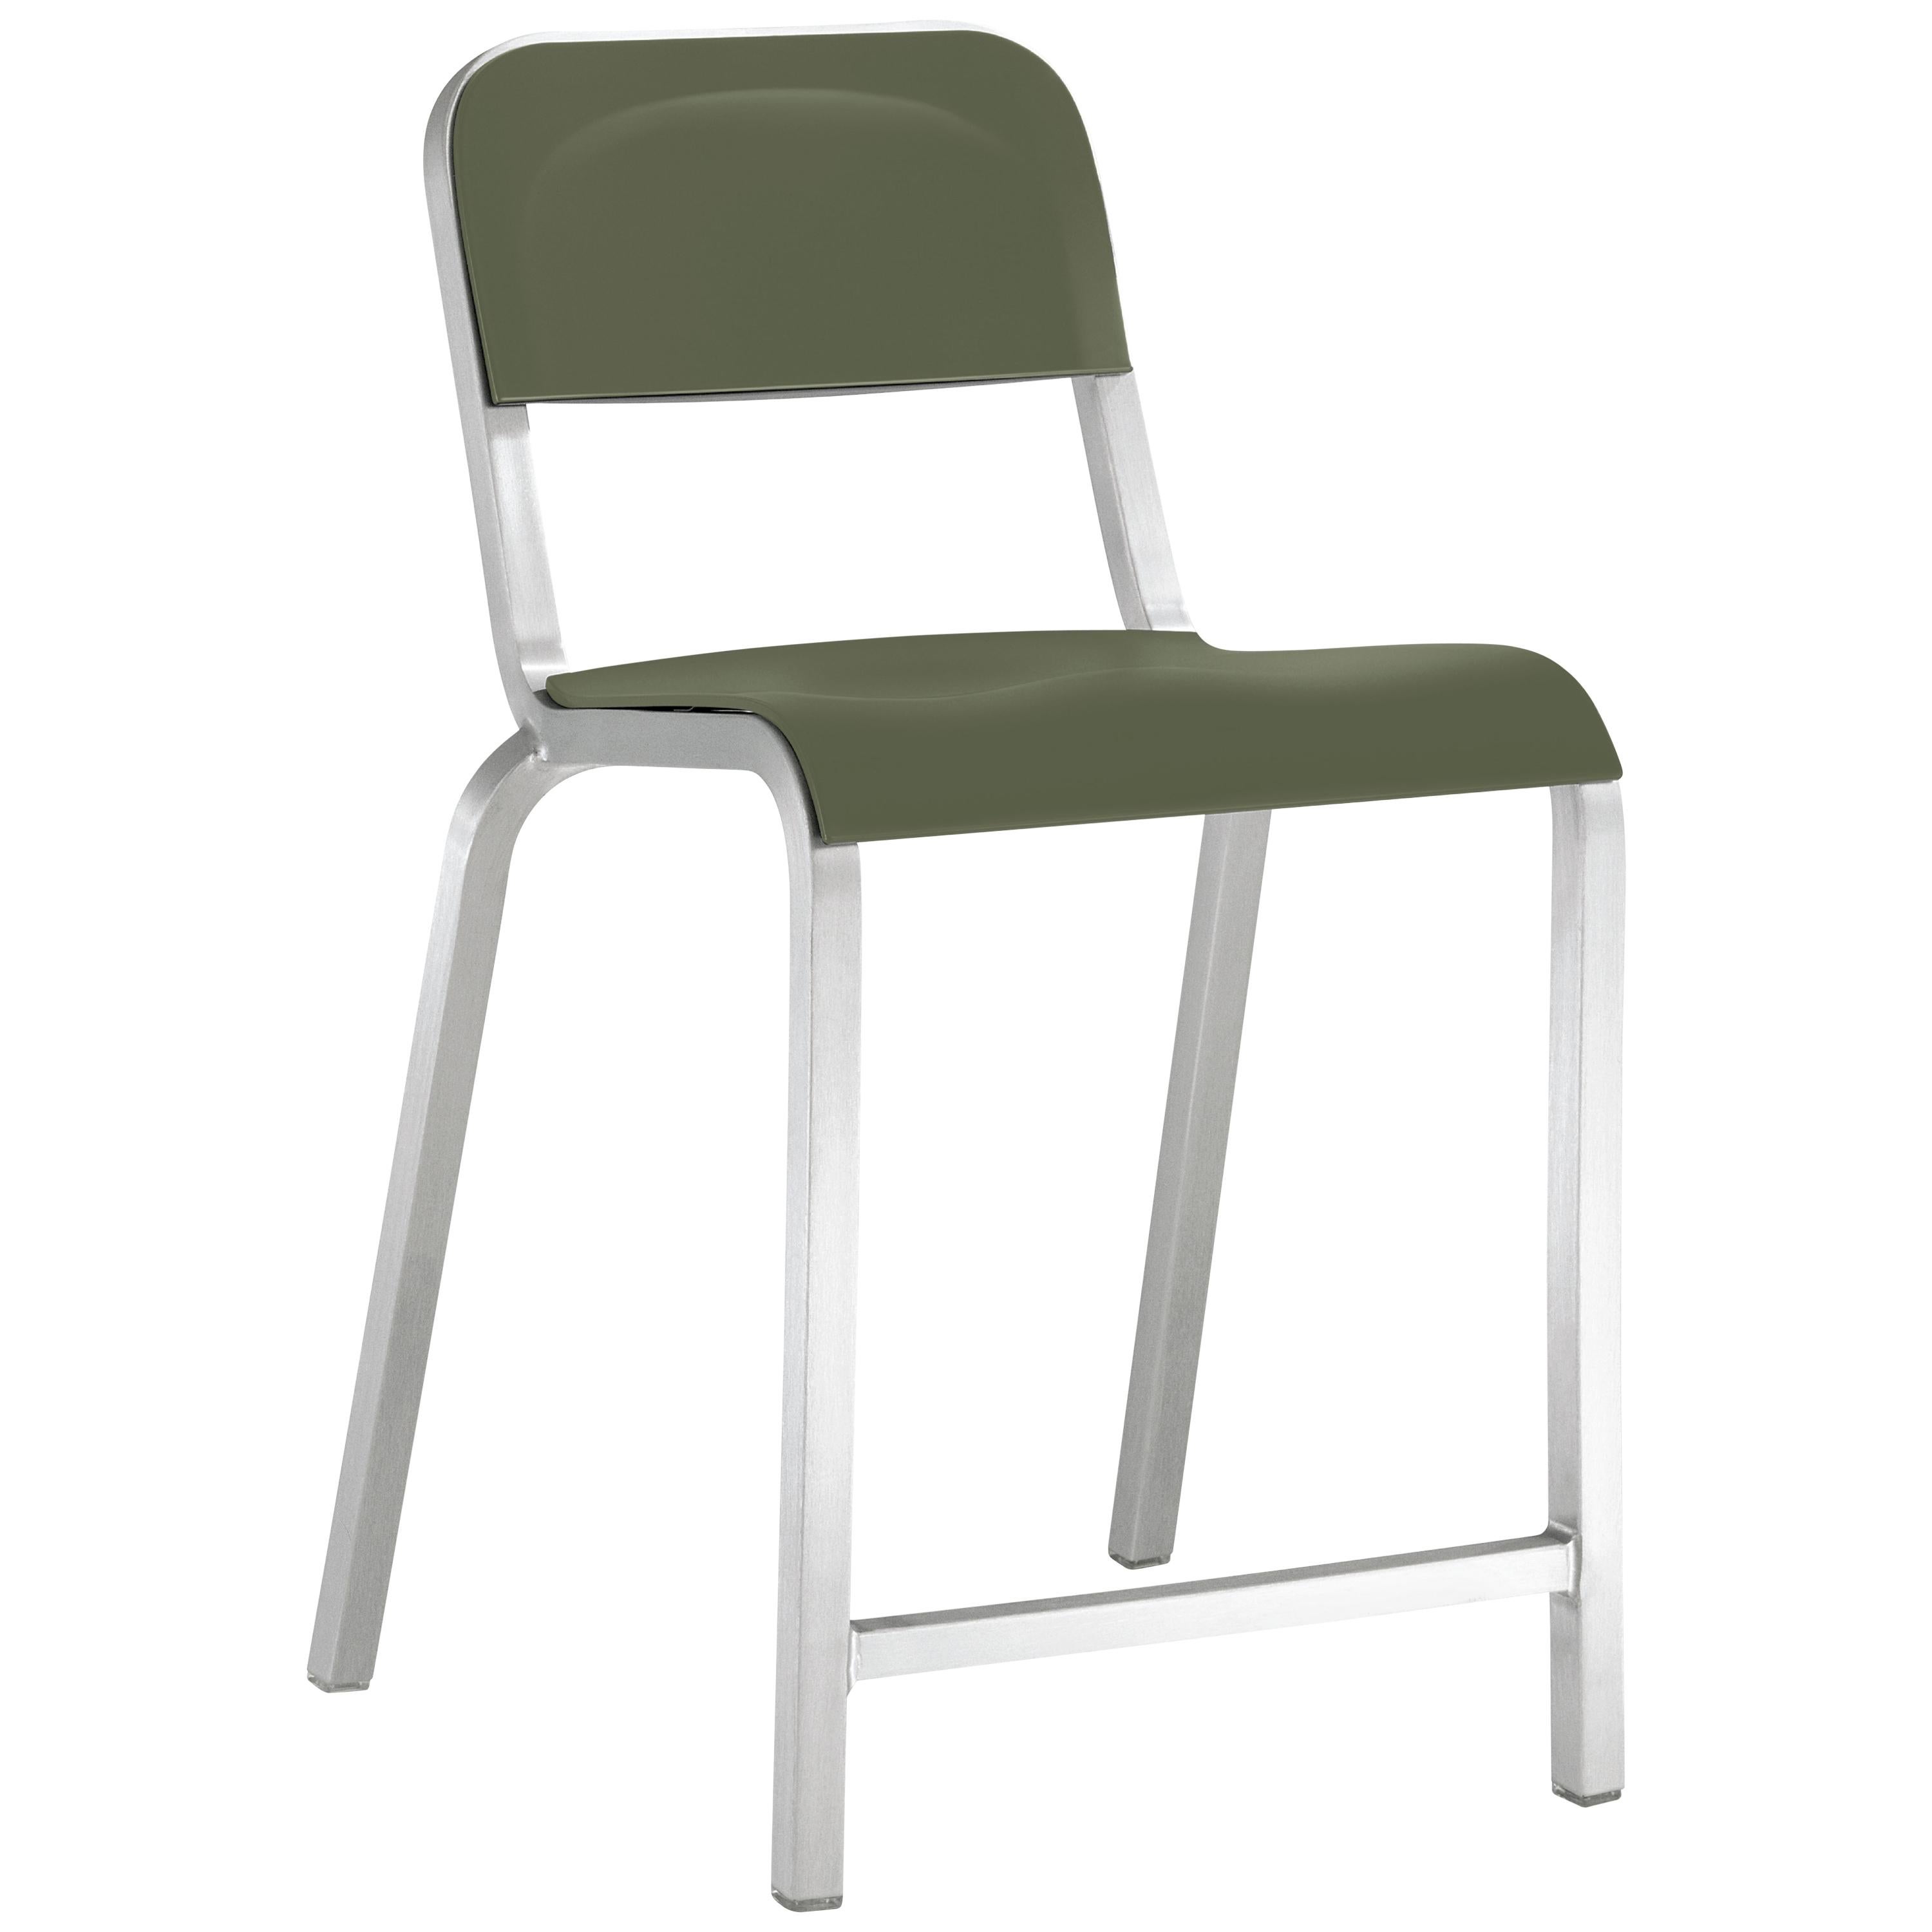 Emeco 1951 Aluminum Counter Stool with Cypress Green Seat by Adrian Van Hooydonk For Sale